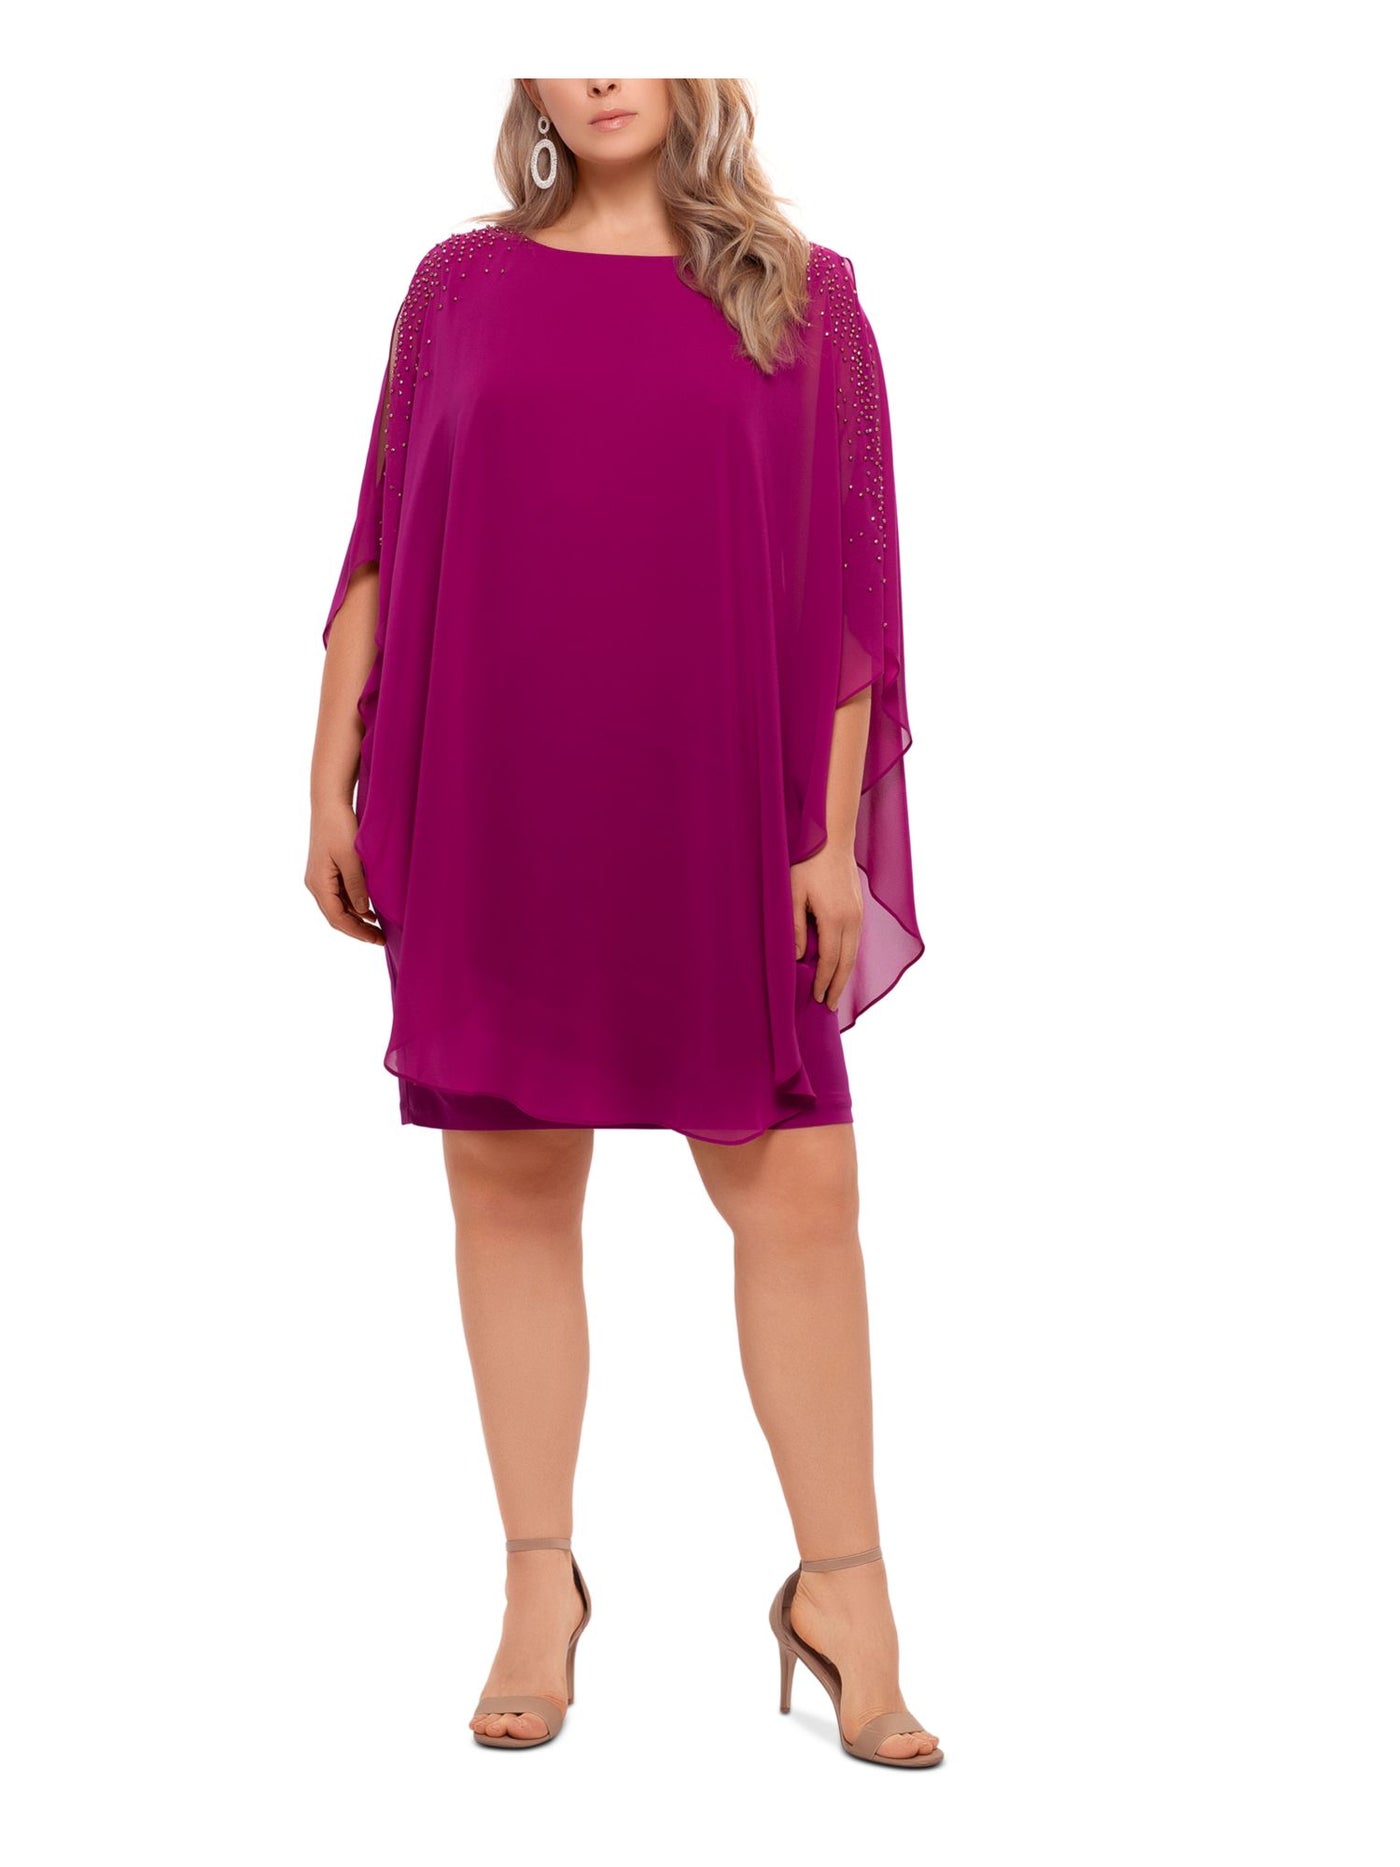 X BY XSCAPE Womens Purple Stretch Cold Shoulder Chiffon Overlay Elbow Sleeve Boat Neck Above The Knee Evening Shift Dress Plus 18W